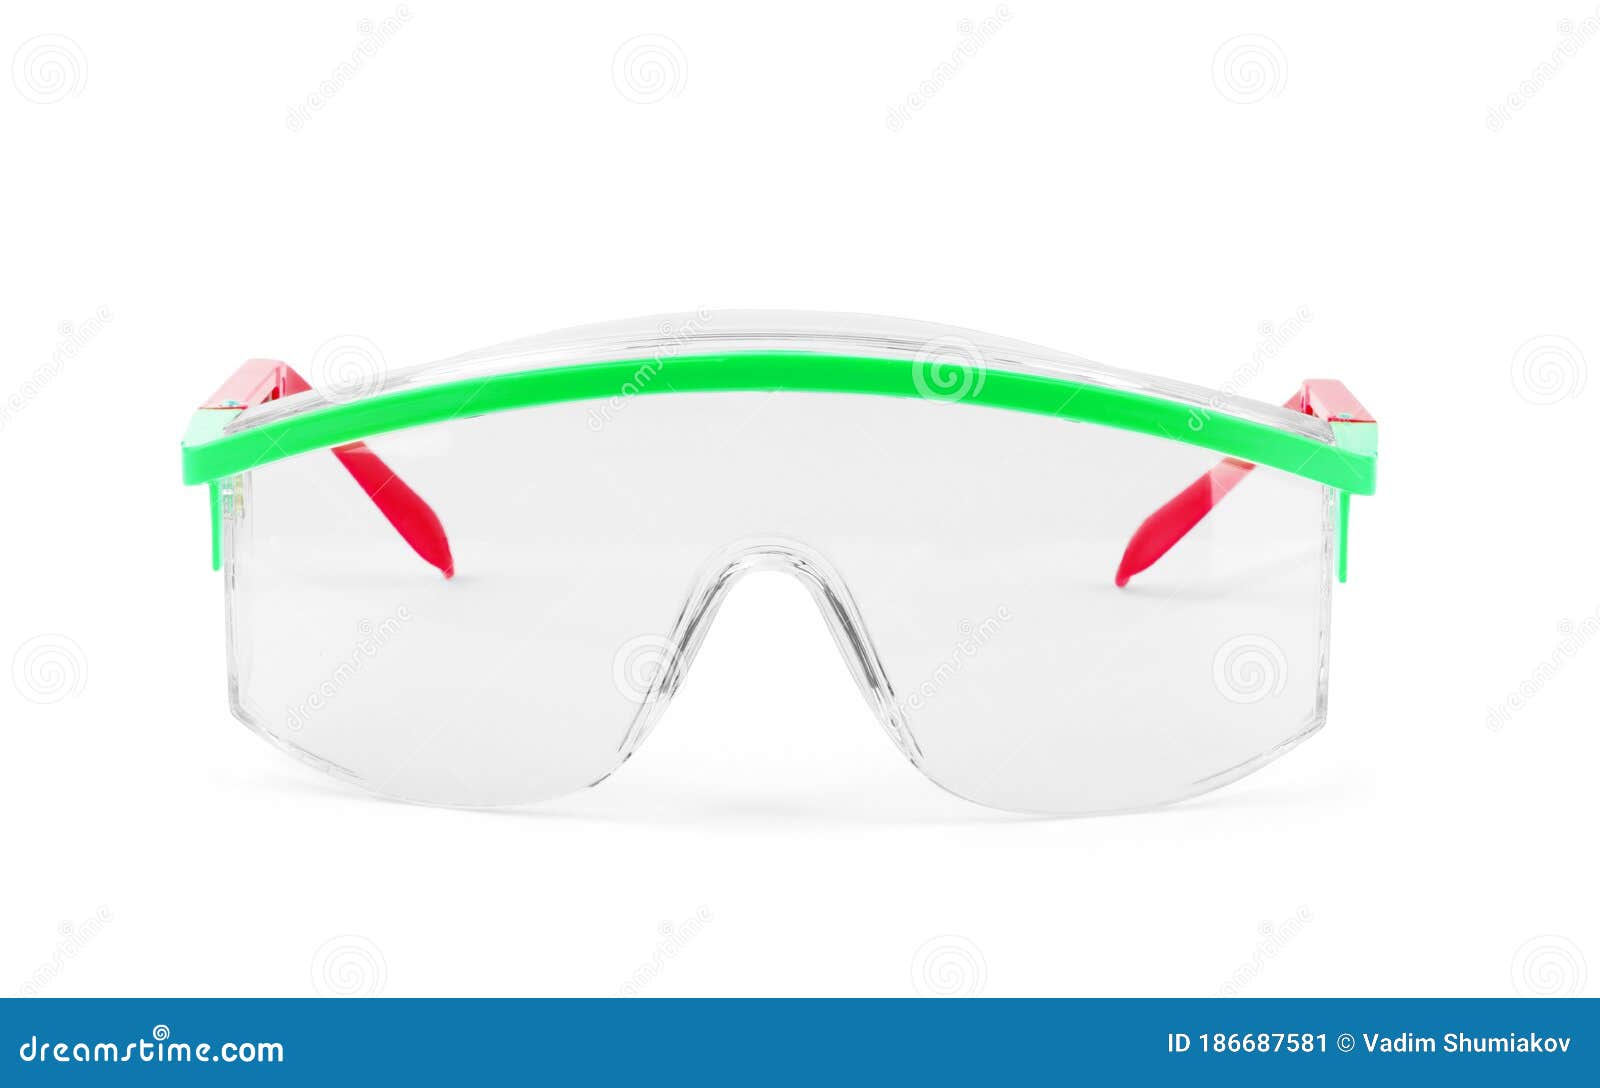 plastic protective work glasses  on a white background